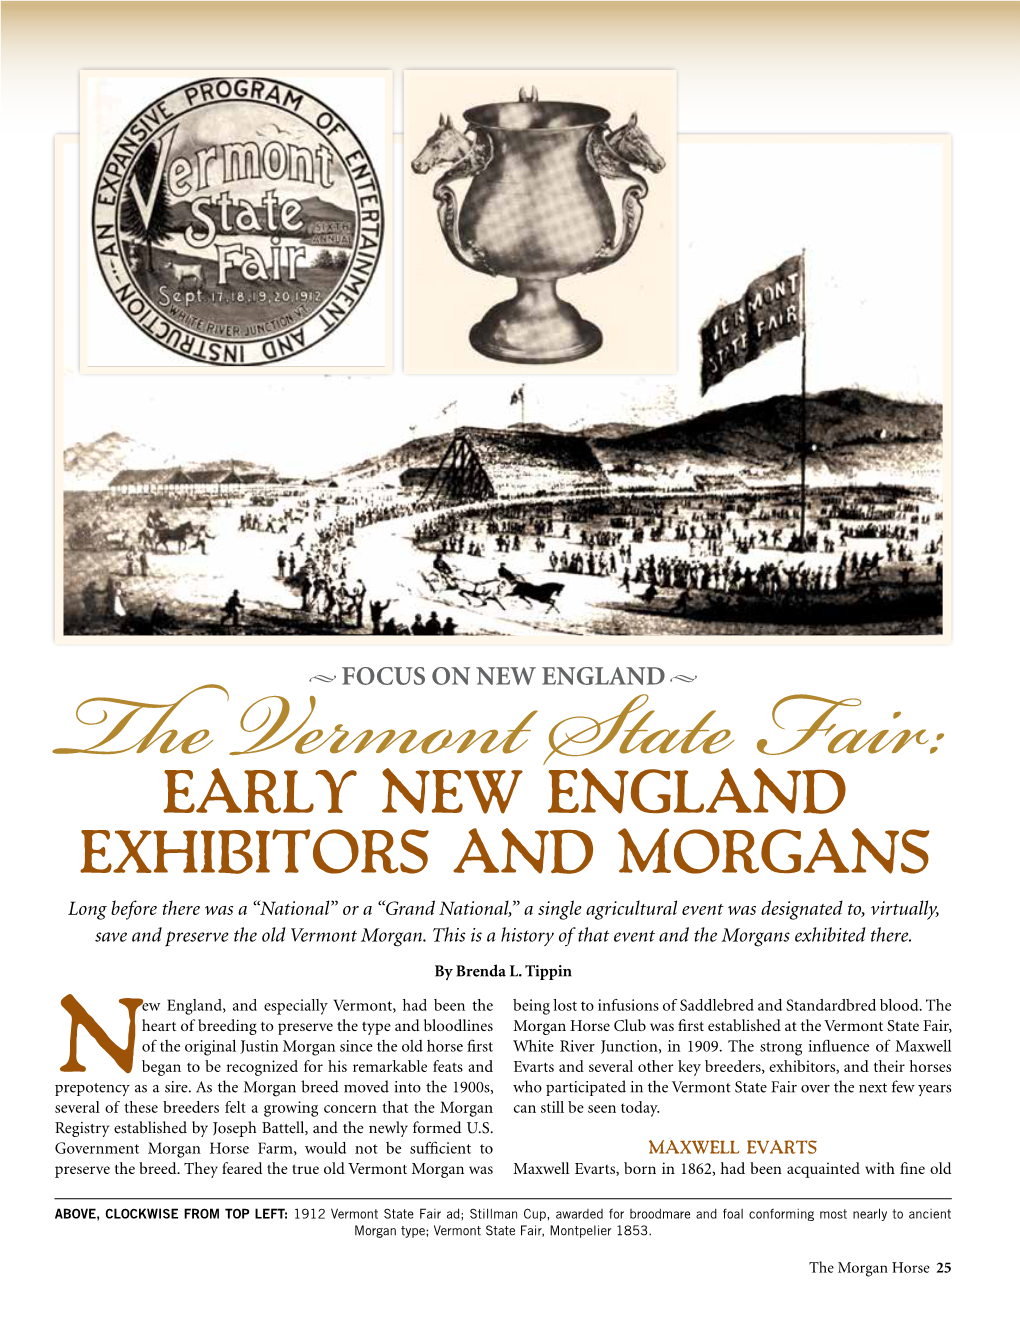 The Vermont State Fair: Early New England Exhibitors and Morgans